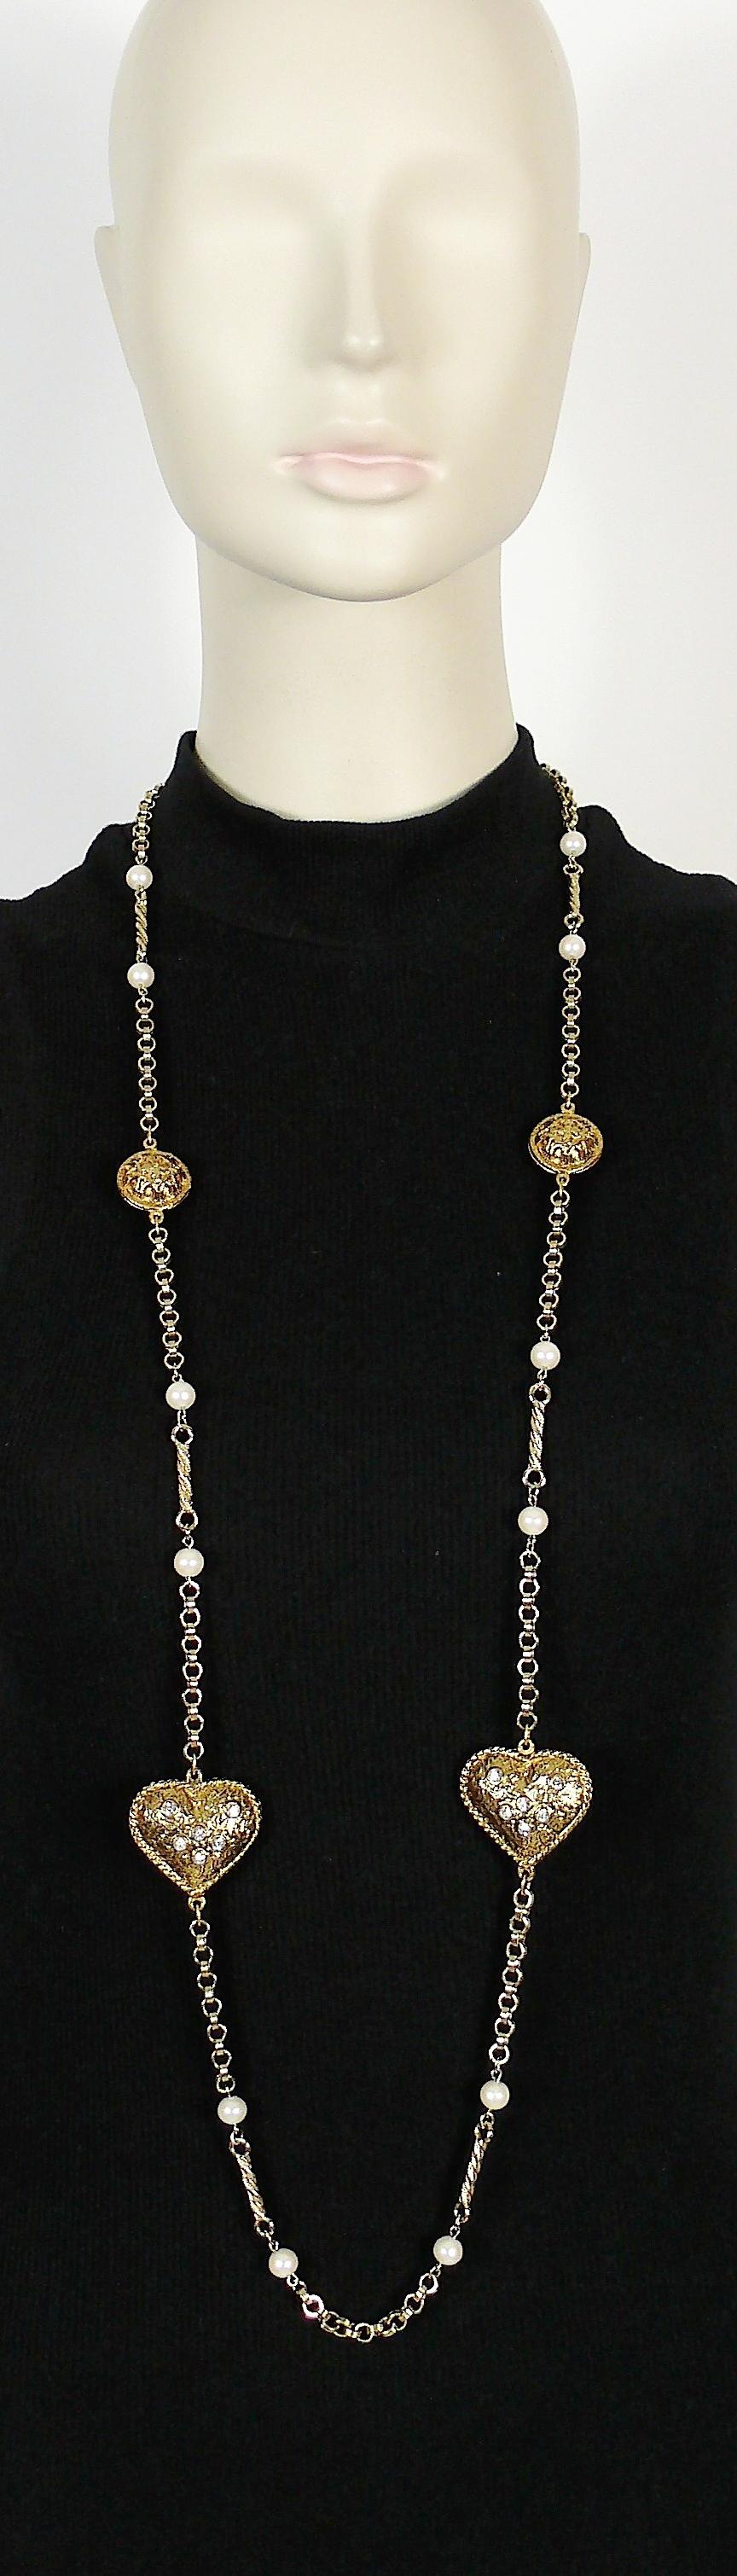 YVES SAINT LAURENT RIVE GAUCHE vintage gold toned chain sautoir necklace featuring two jewelled textured hearts, medallions and faux pearls.

This necklace can be wrapped two times around the neck.

Spring clasp closure.

Embossed YVES SAINT LAURENT